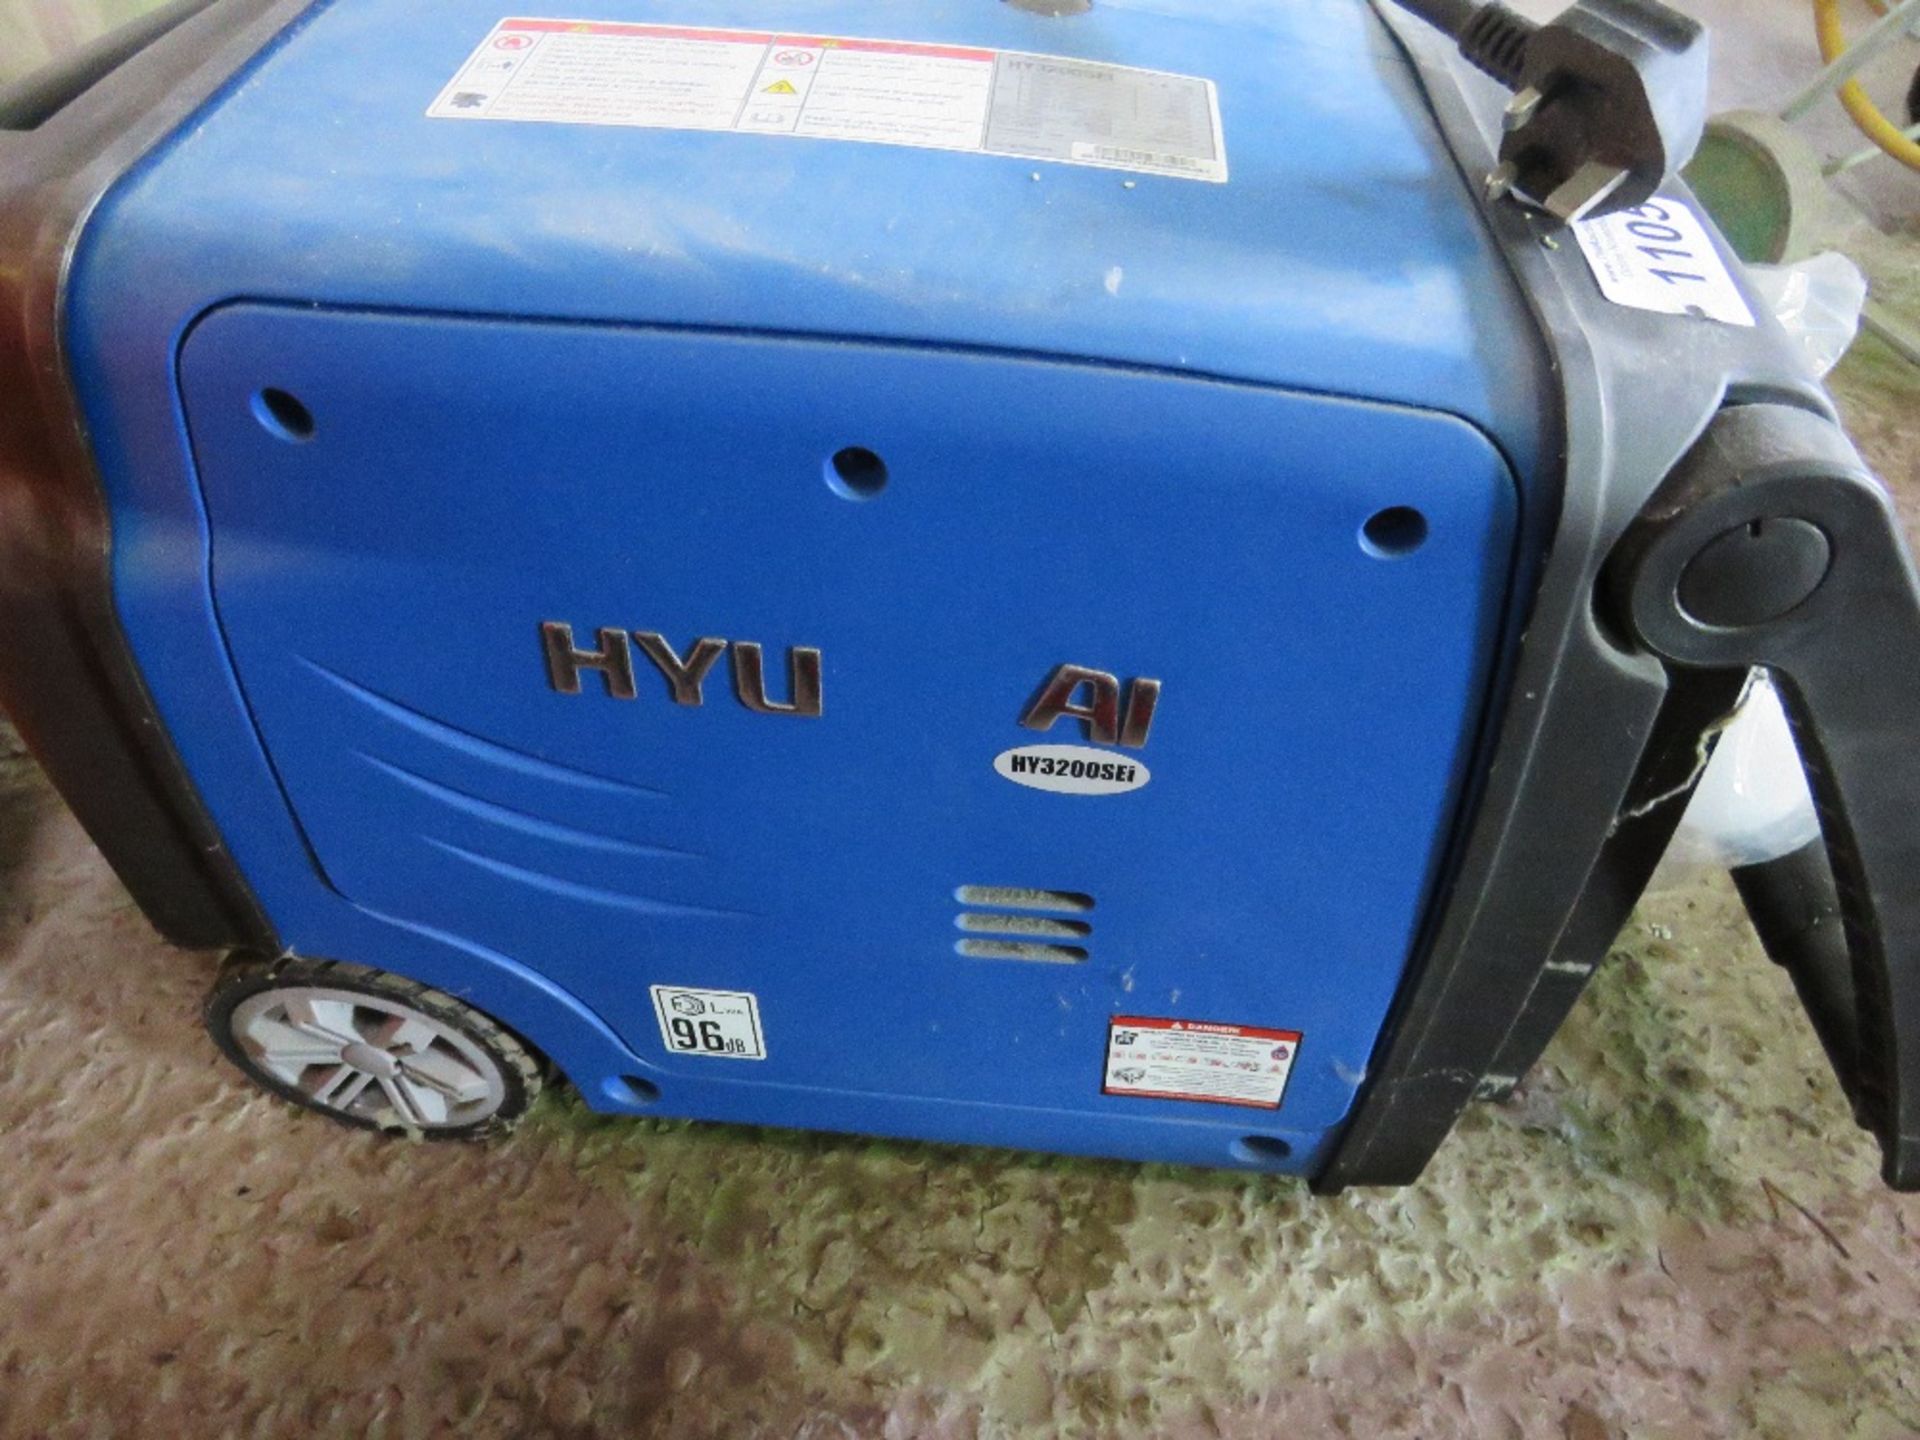 HYUNDAI H3200SEI CAMPING GENERATOR, LITTLE/UNUSED OVER LAST 2 YEARS. THIS LOT IS SOLD UNDER THE A - Image 5 of 6